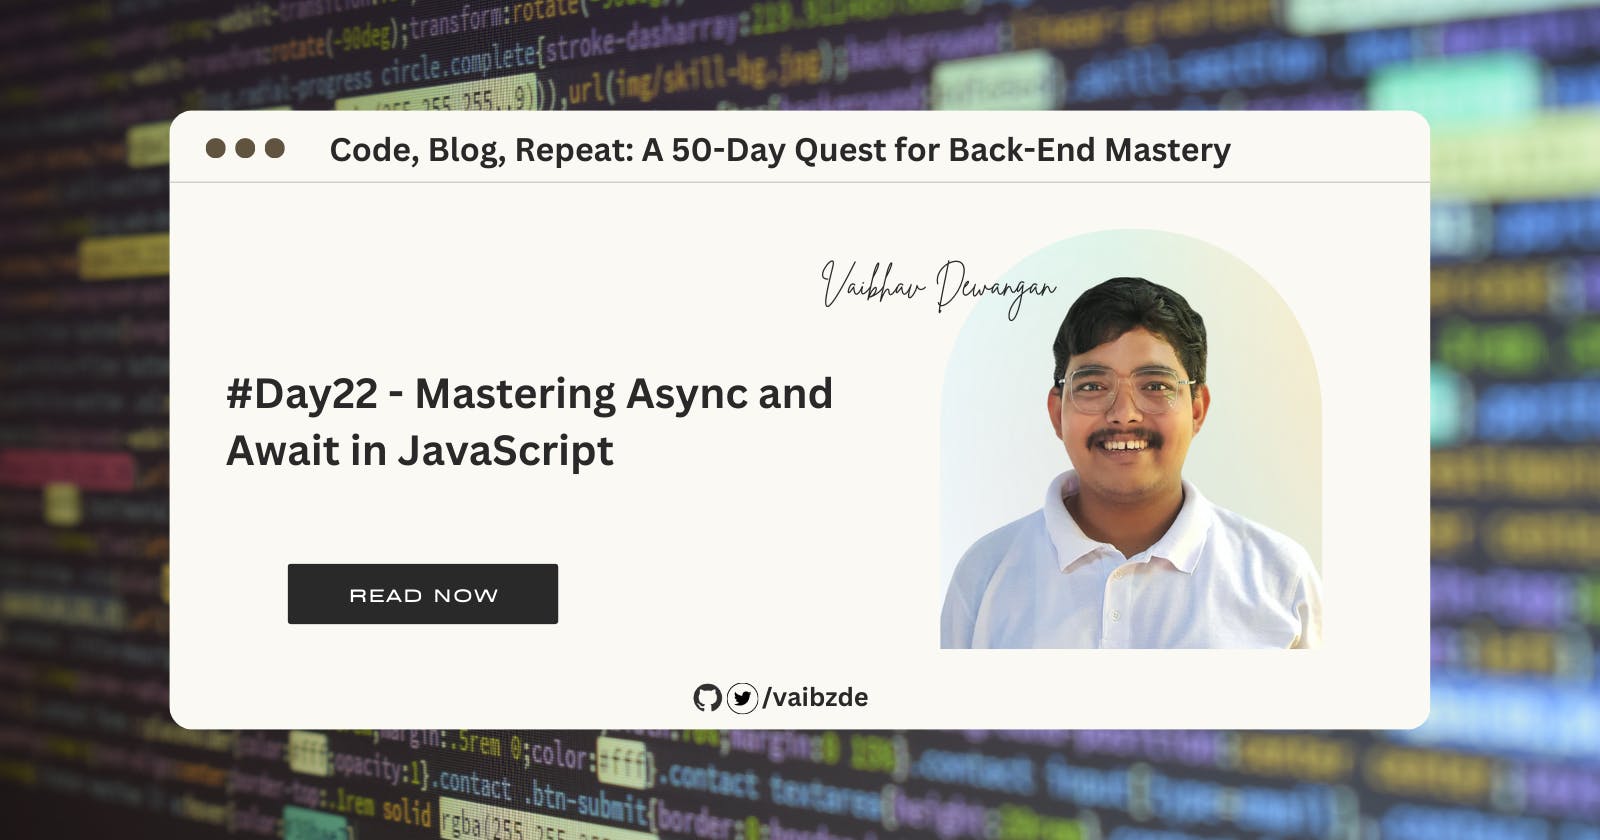 #Day22 - Mastering Async and Await in JavaScript